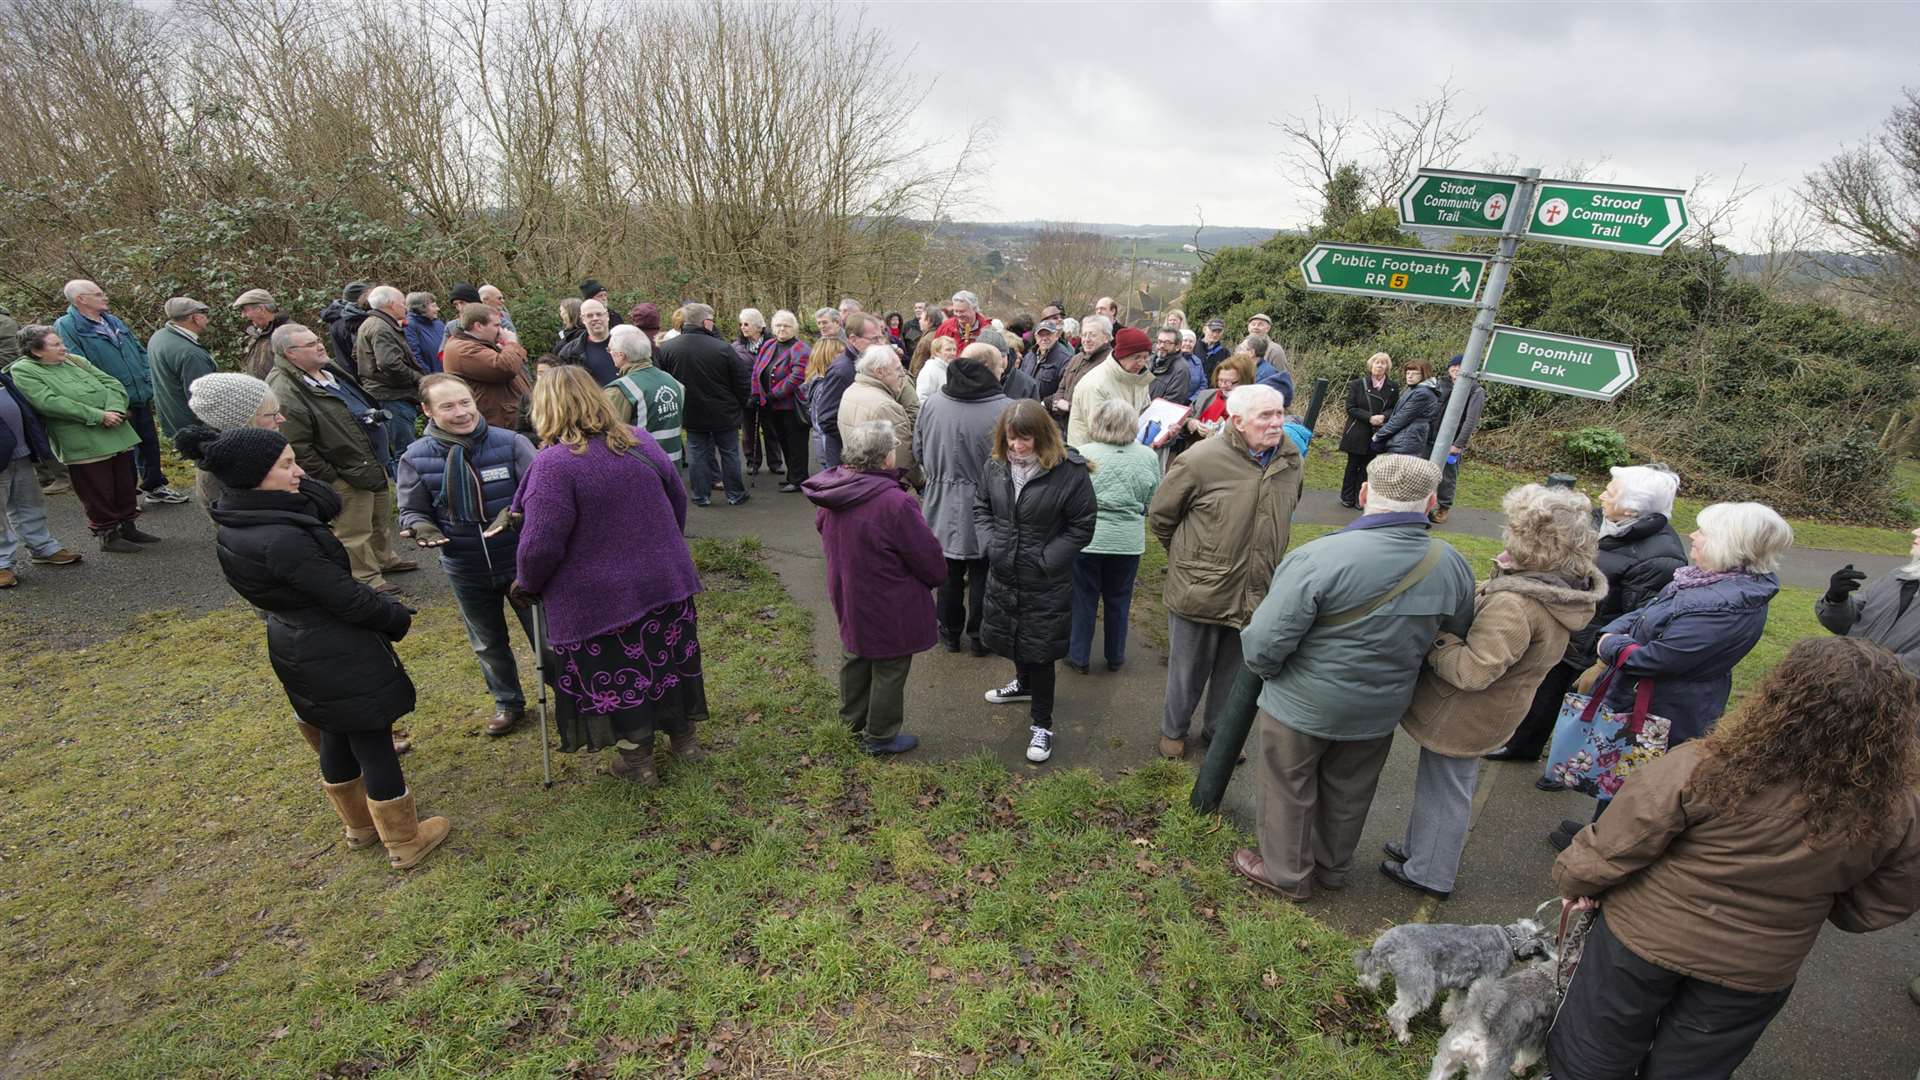 People gather at the site of the planned houses